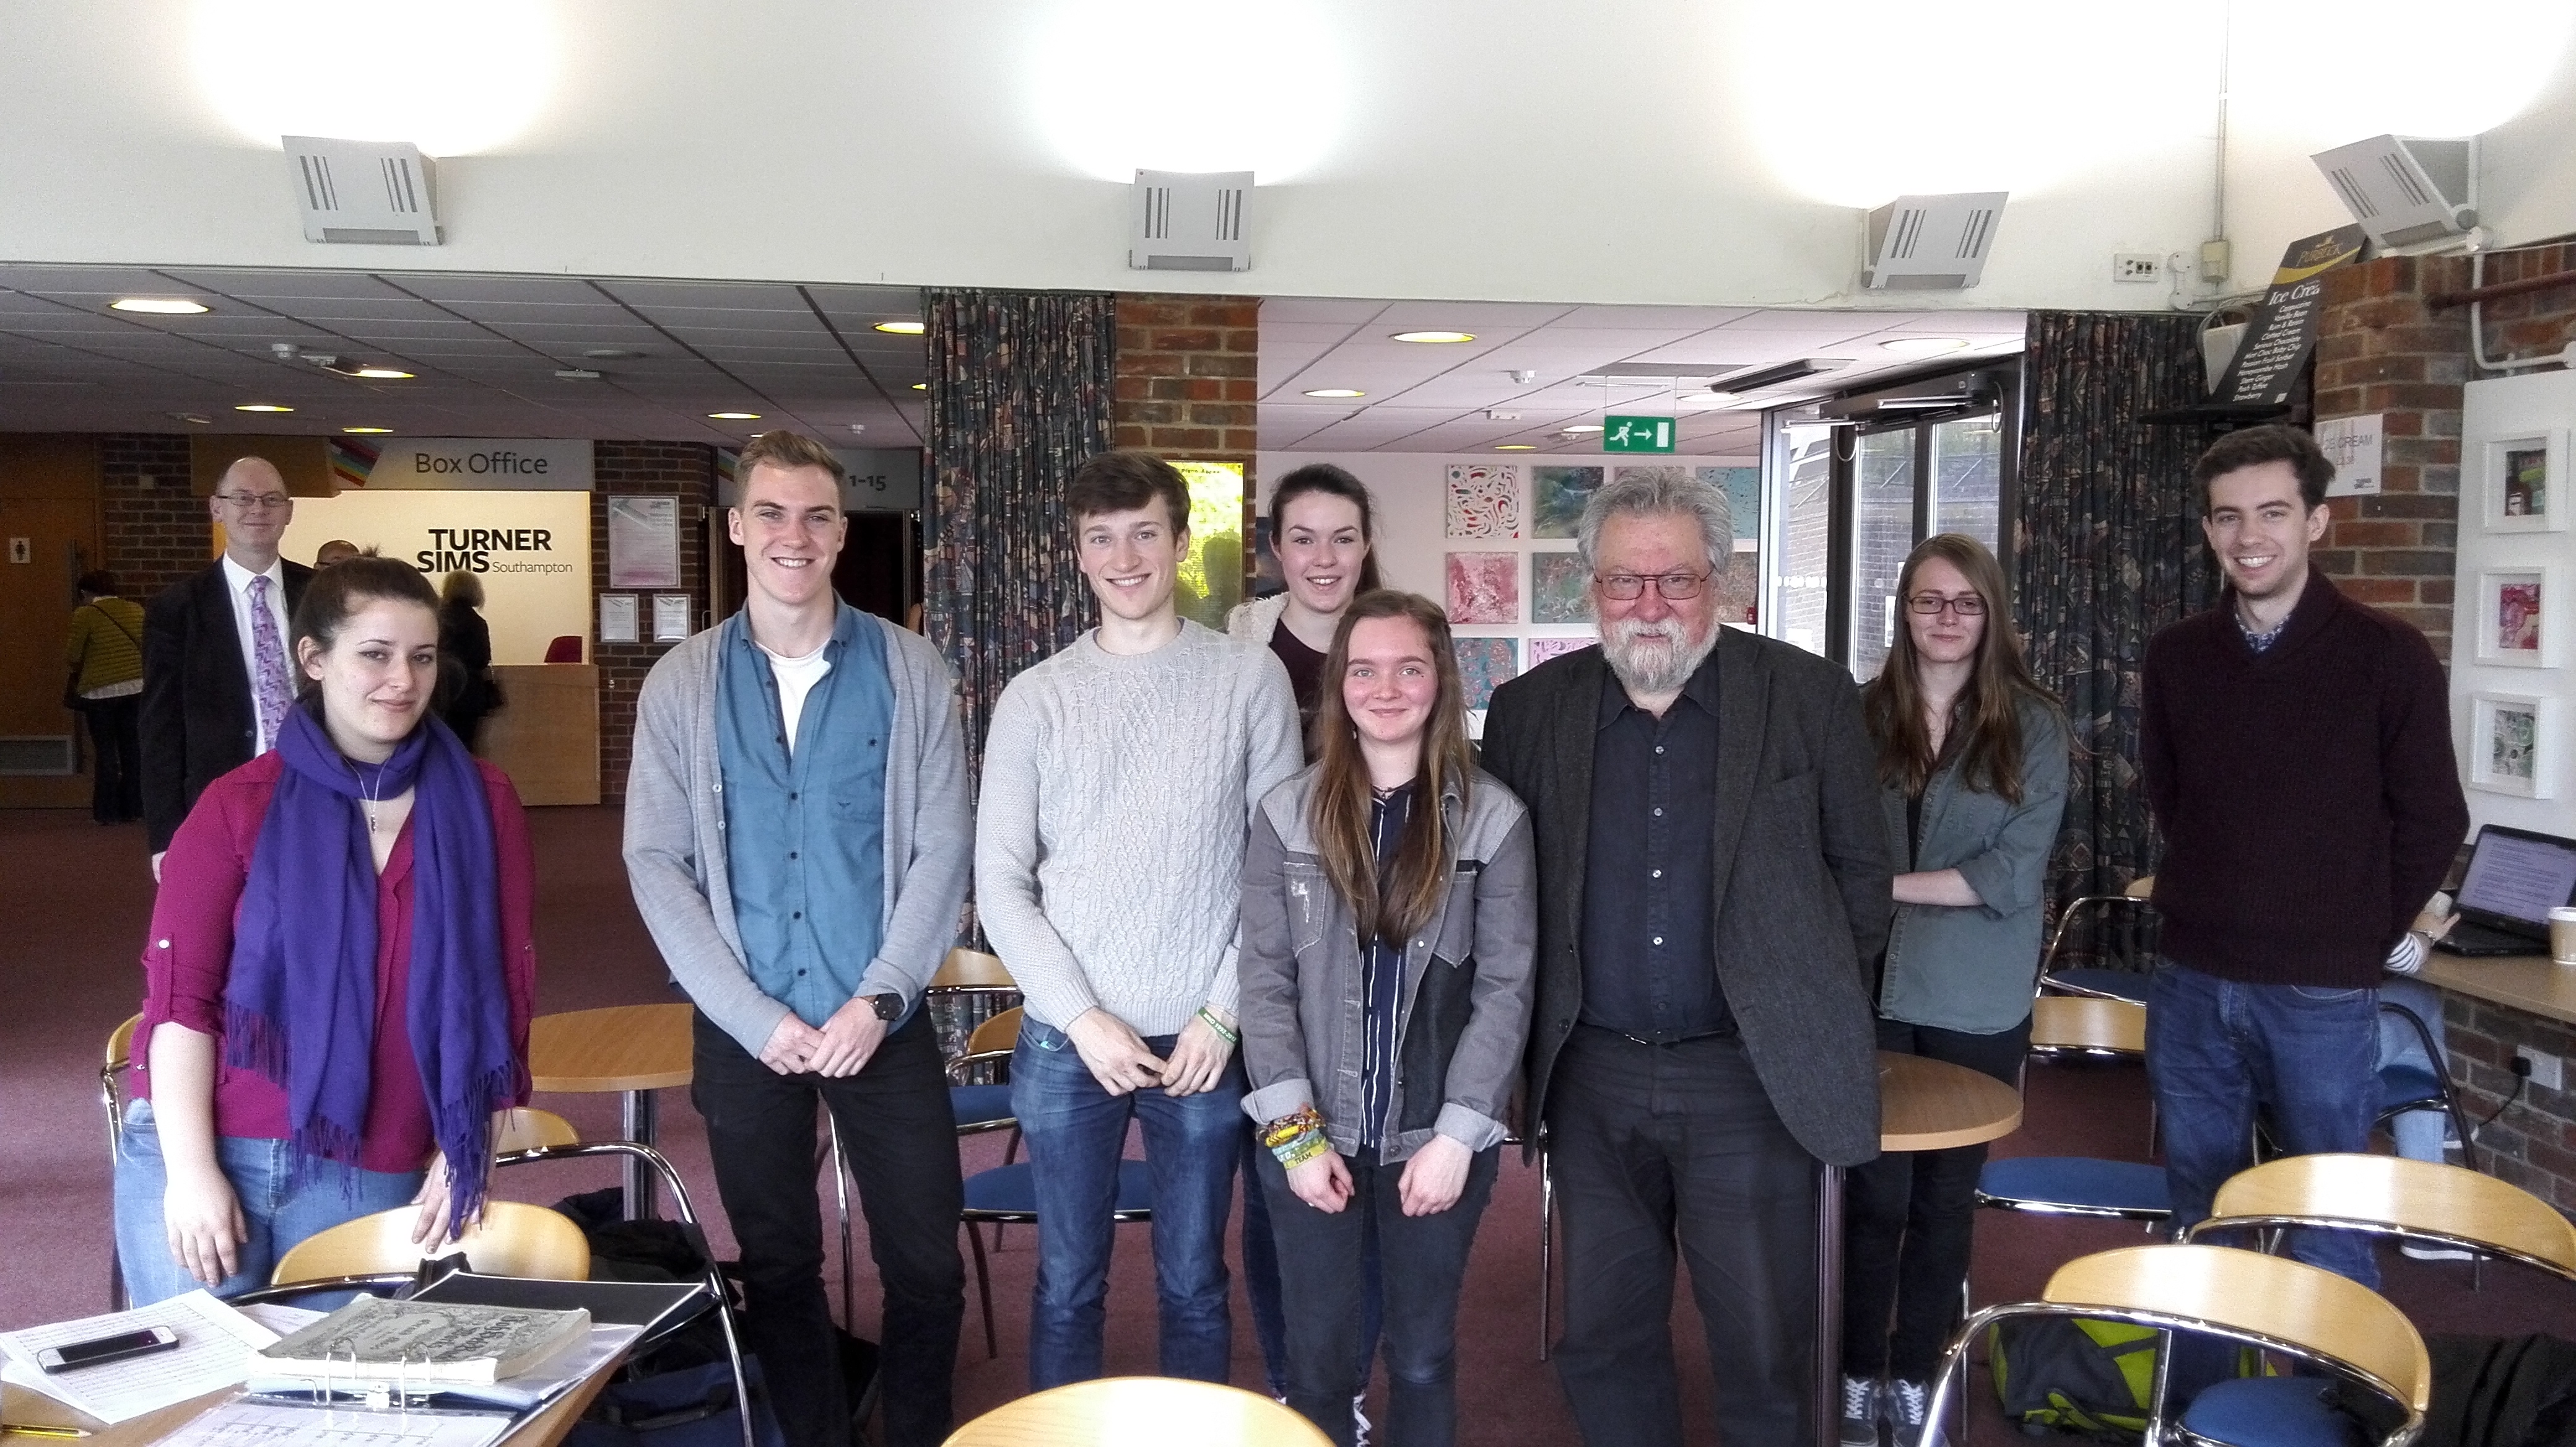 Saxophonist Evan Parker with Music students at the Turner Sims Concert Hall